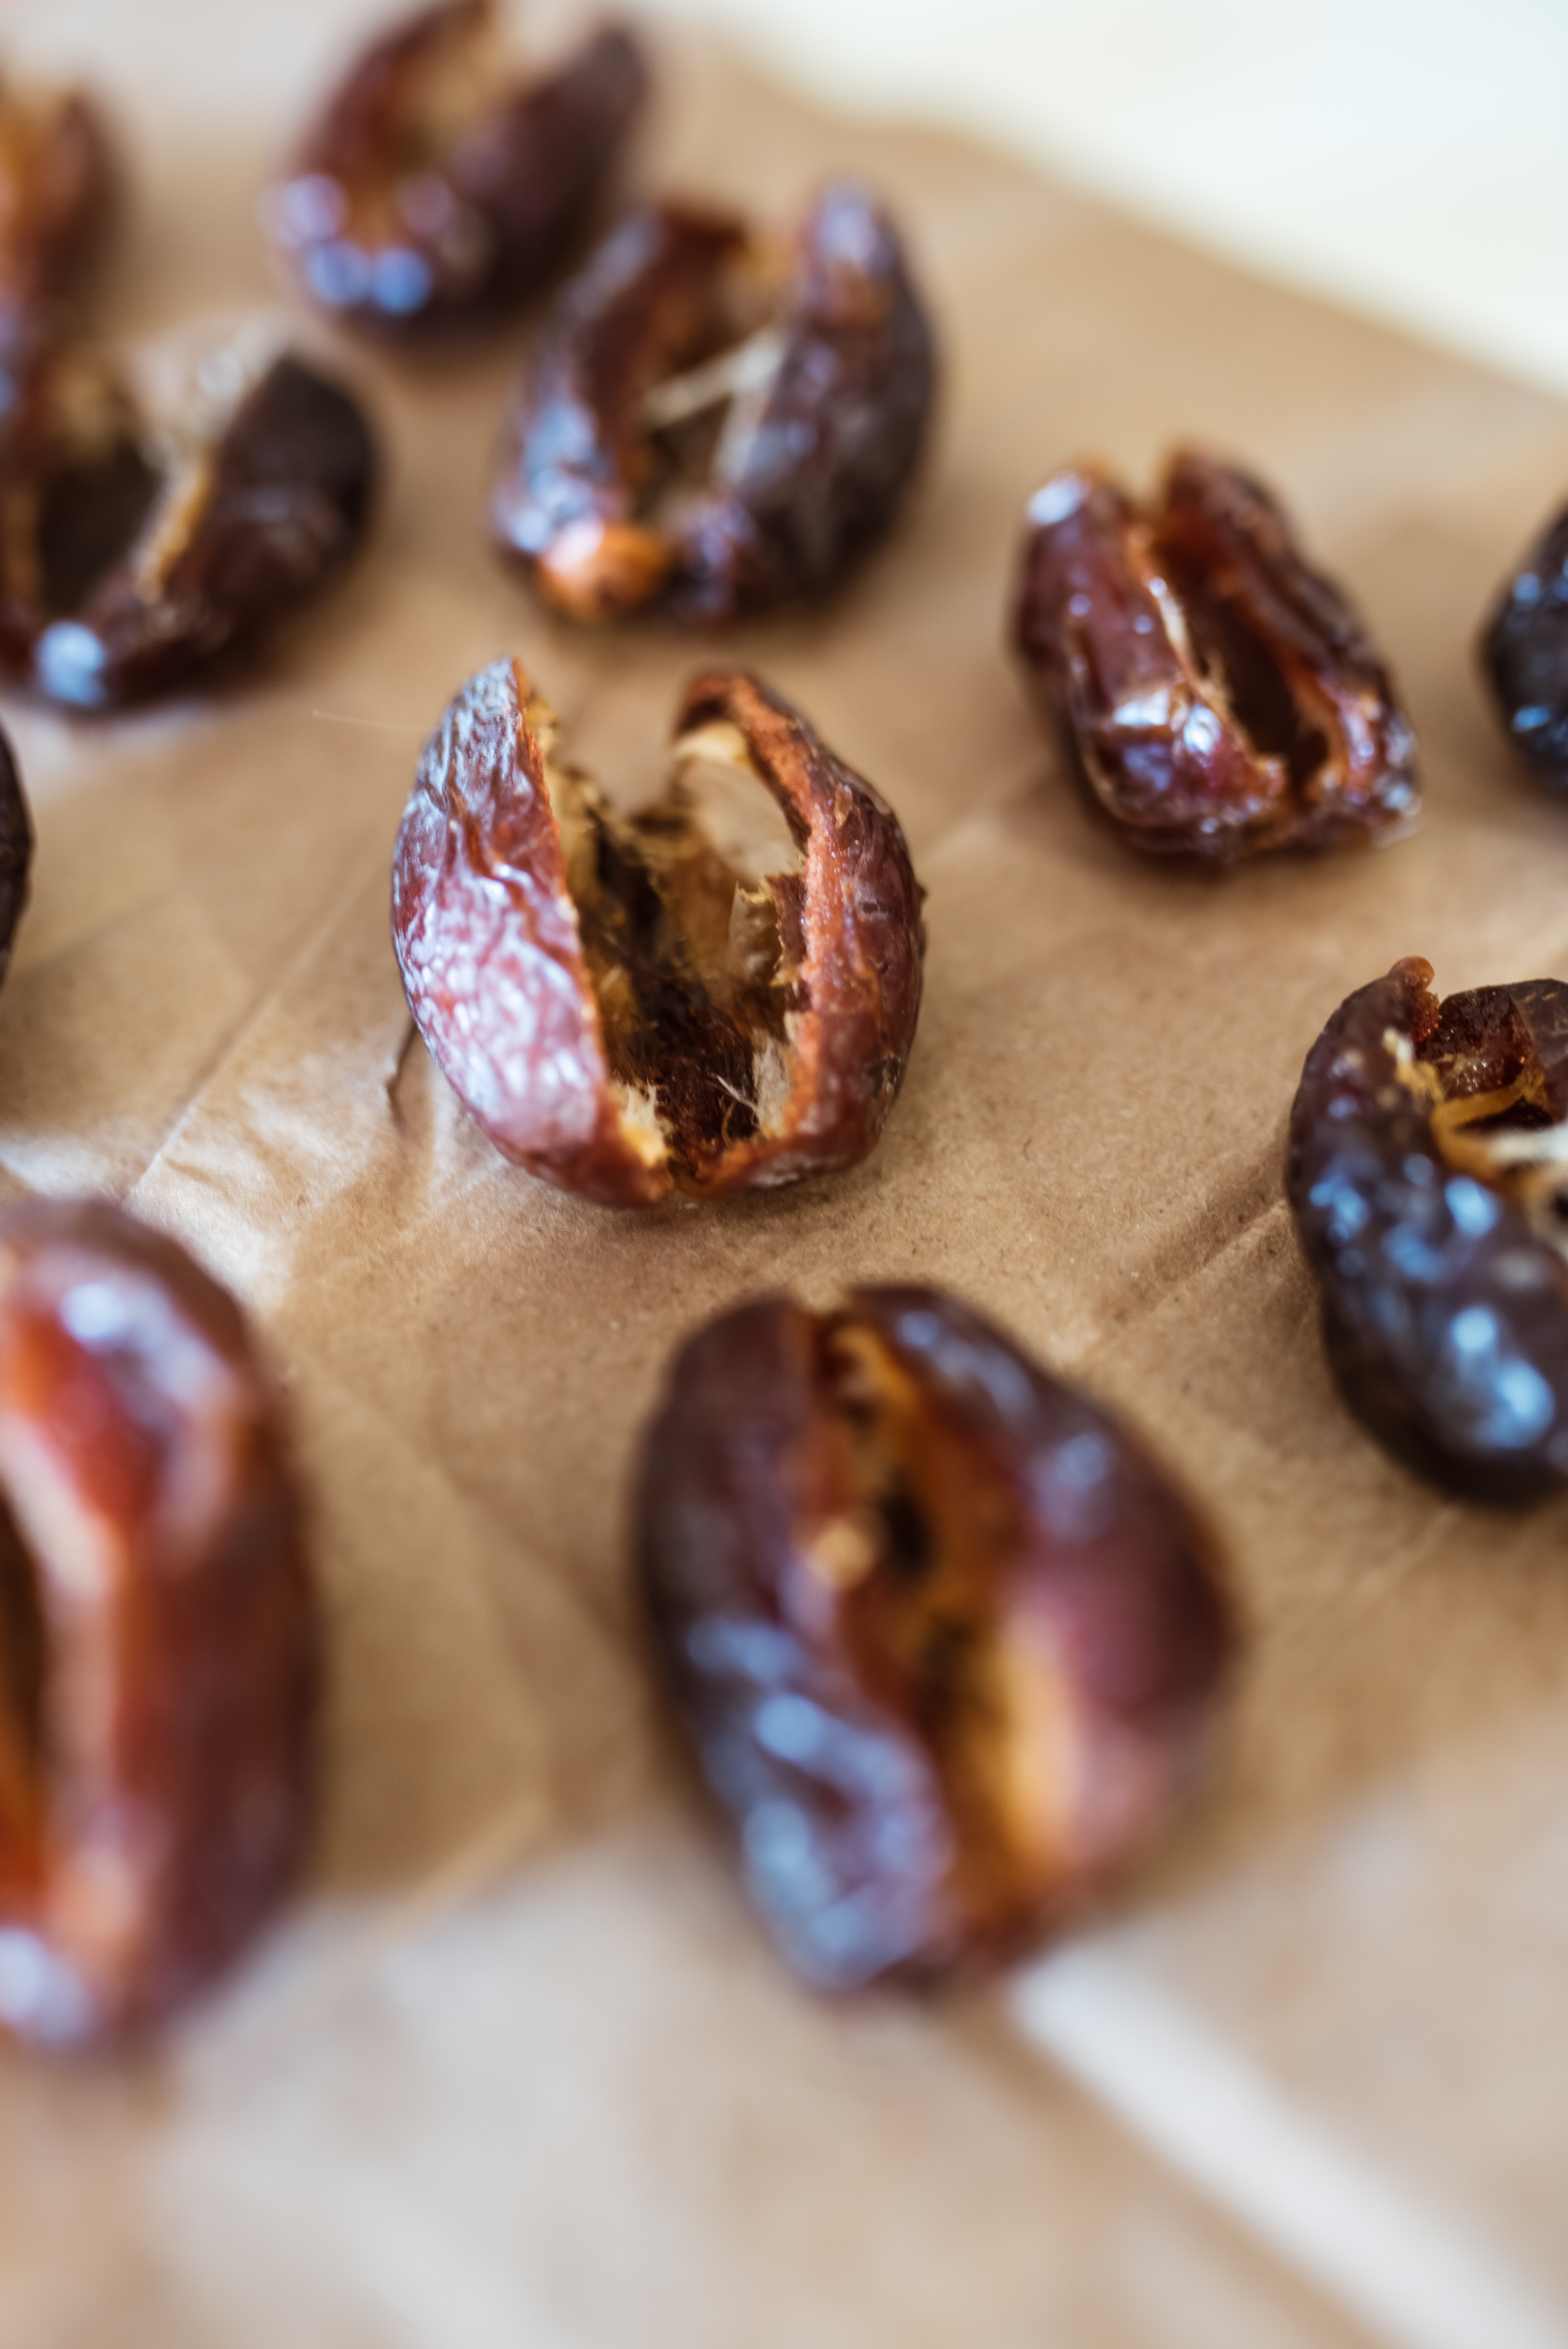 dates lined up on brown paper cut open and ready to be stuffed